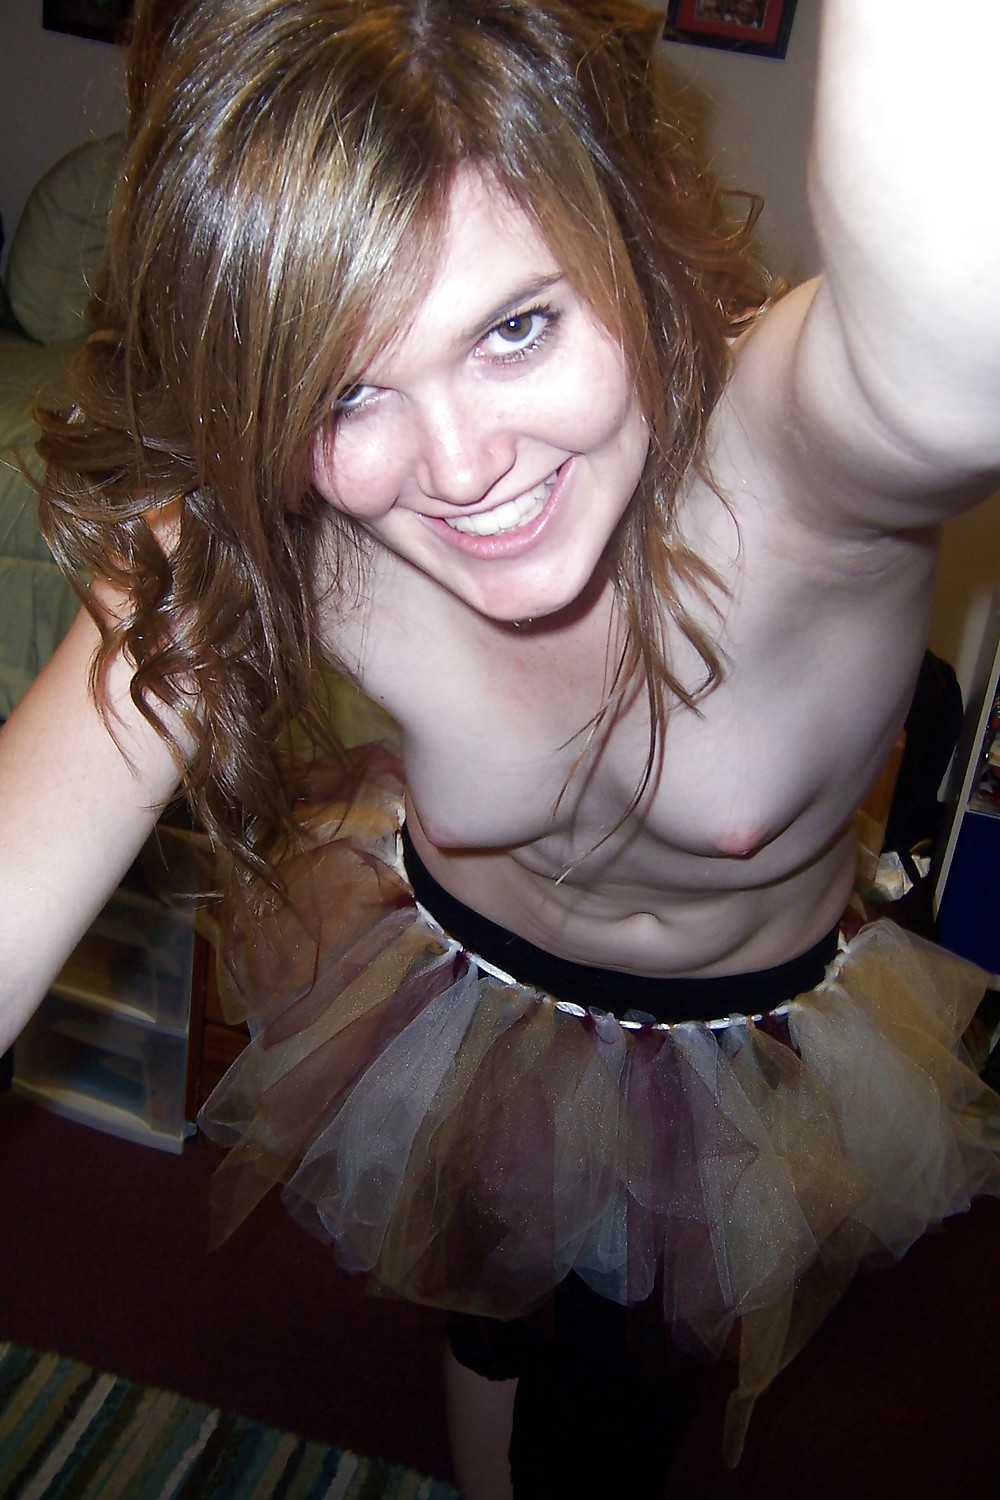 Hairy teen shows everything #23421293